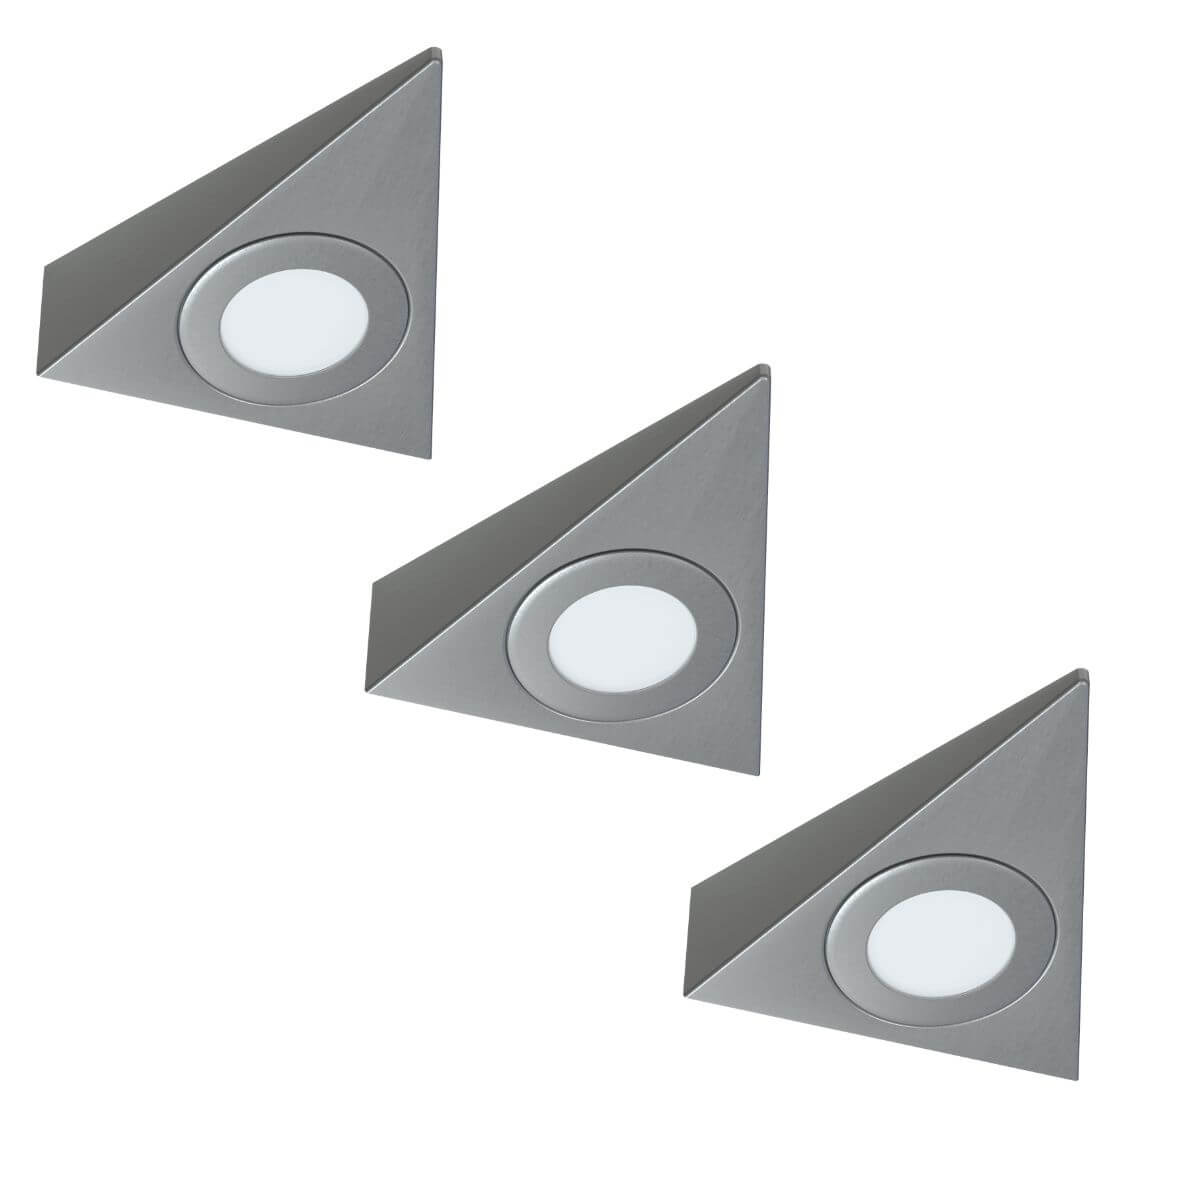 View 3 Pack Triangle Under Cabinet Lights information